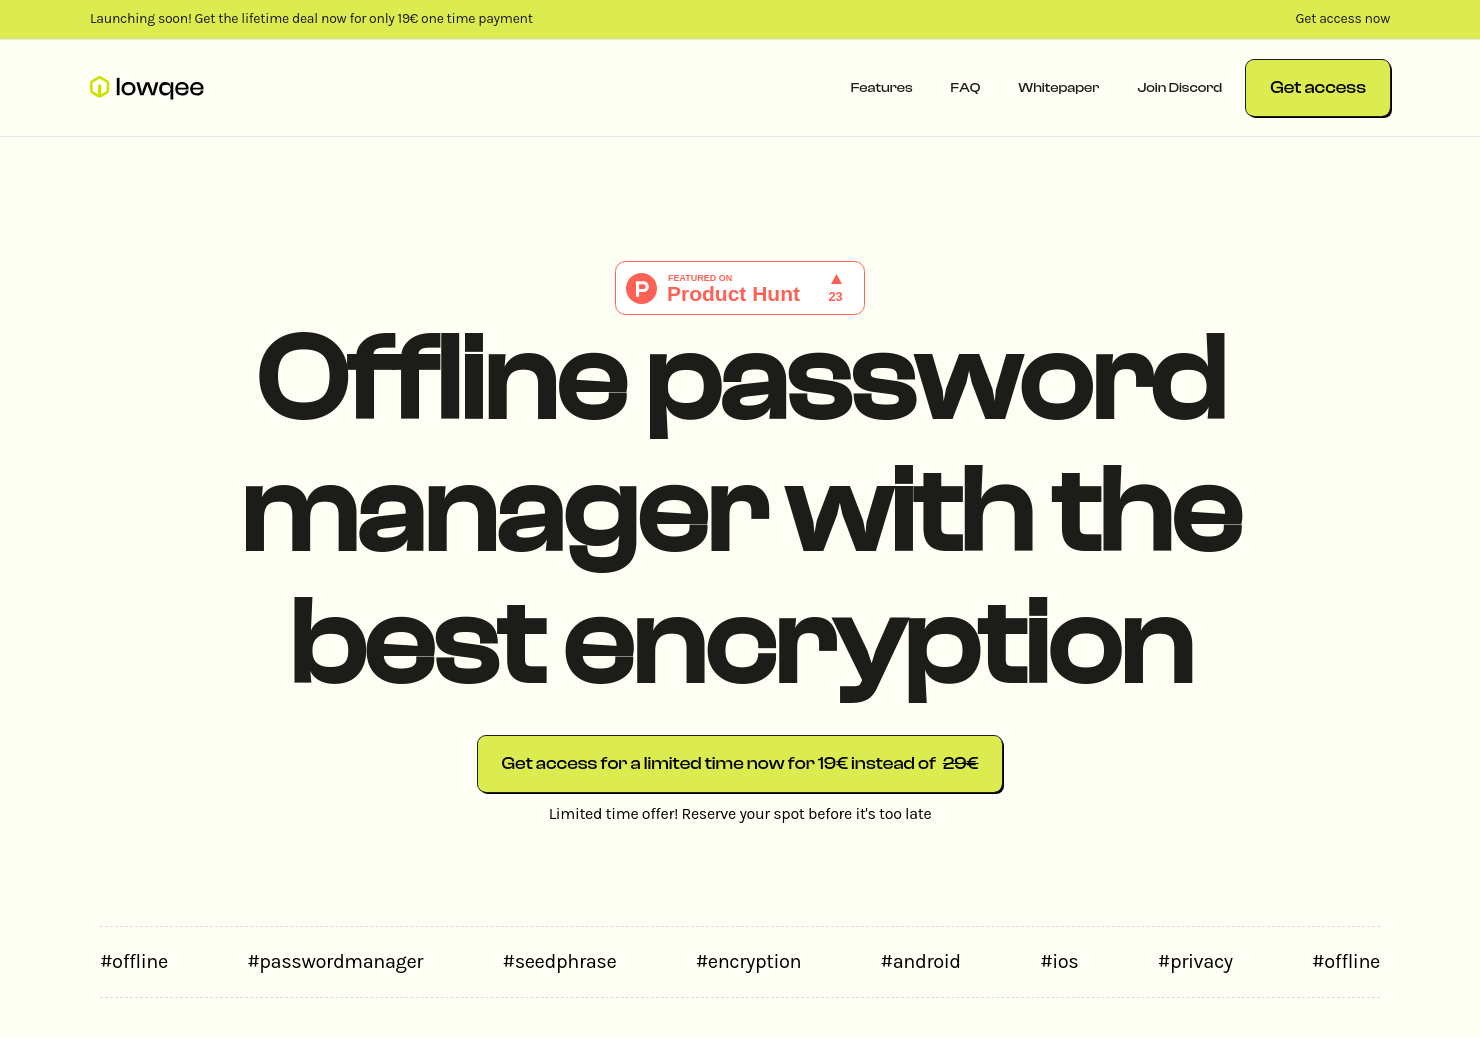 startuptile Lowqee-Offline password manager with the best encryption